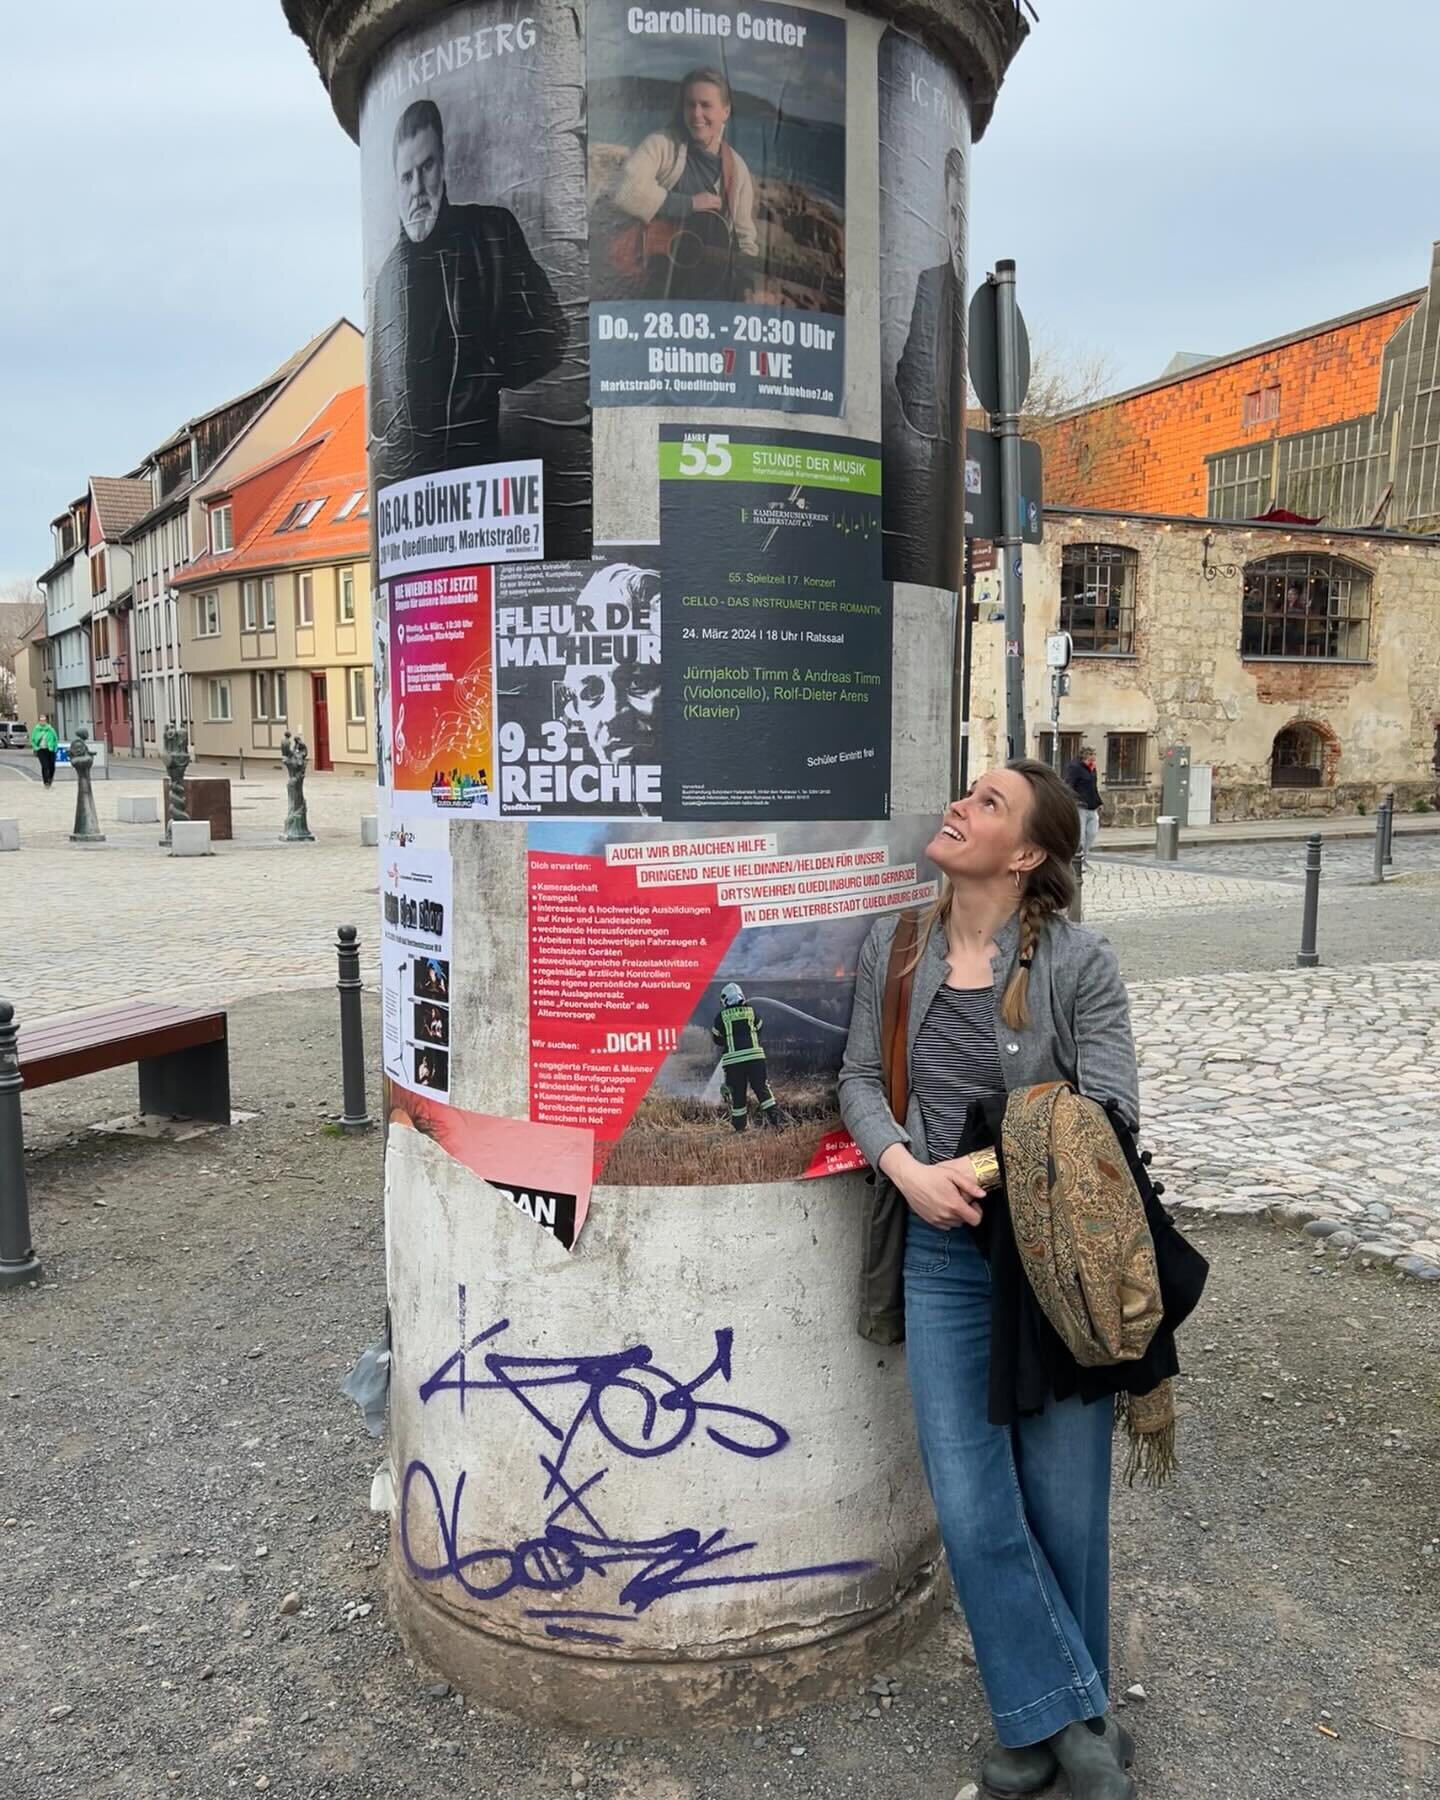 I got a very warm welcome to Quedlinburg today with these posters all over the place! This is an absolutely adorable town and I&rsquo;m very much looking forward to this show :)